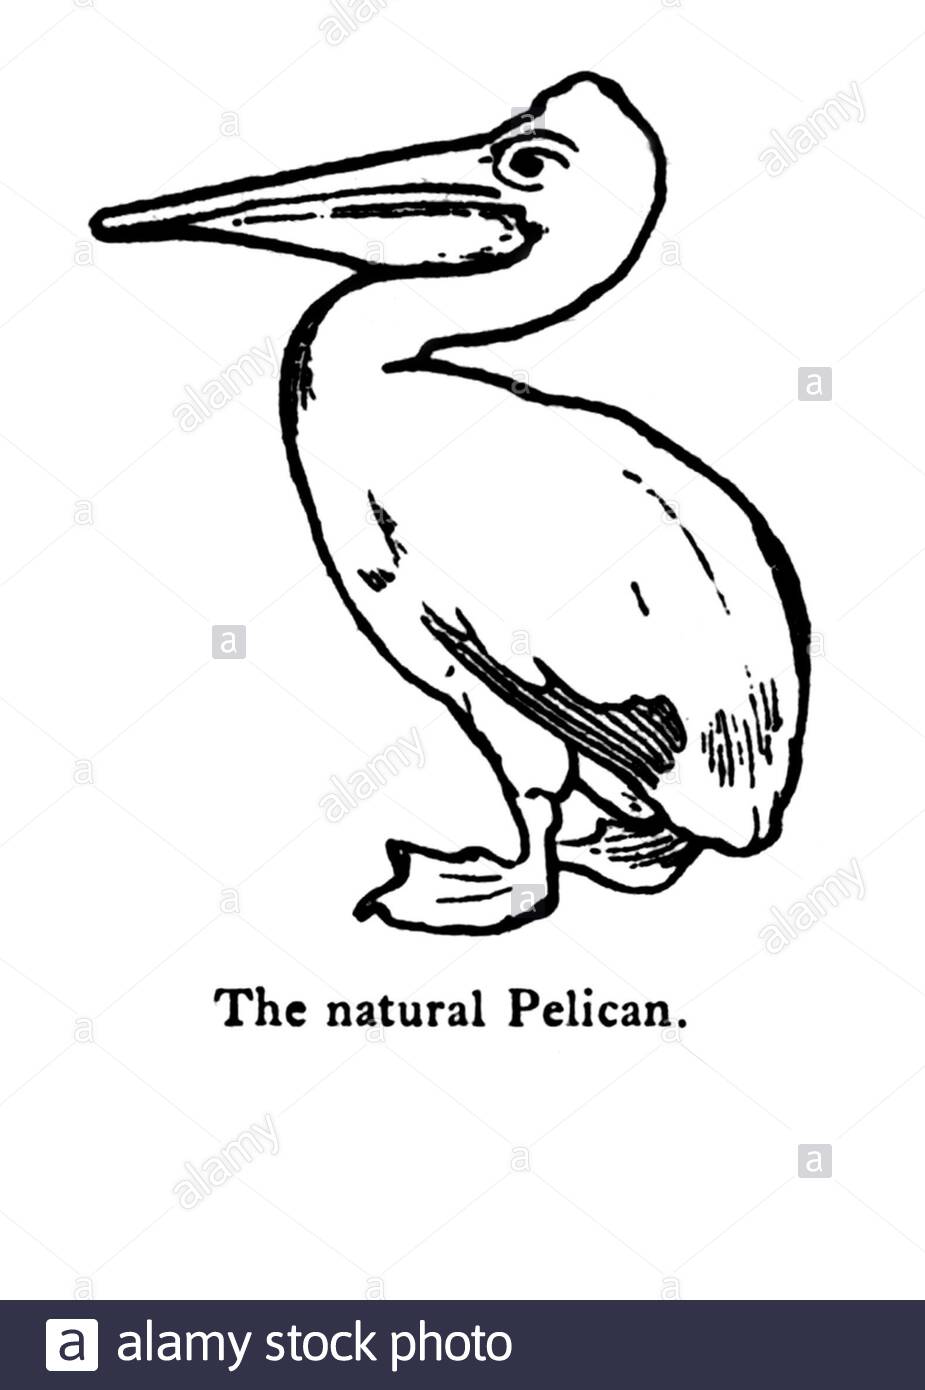 Pelican, vintage illustration from 1900 Stock Photo